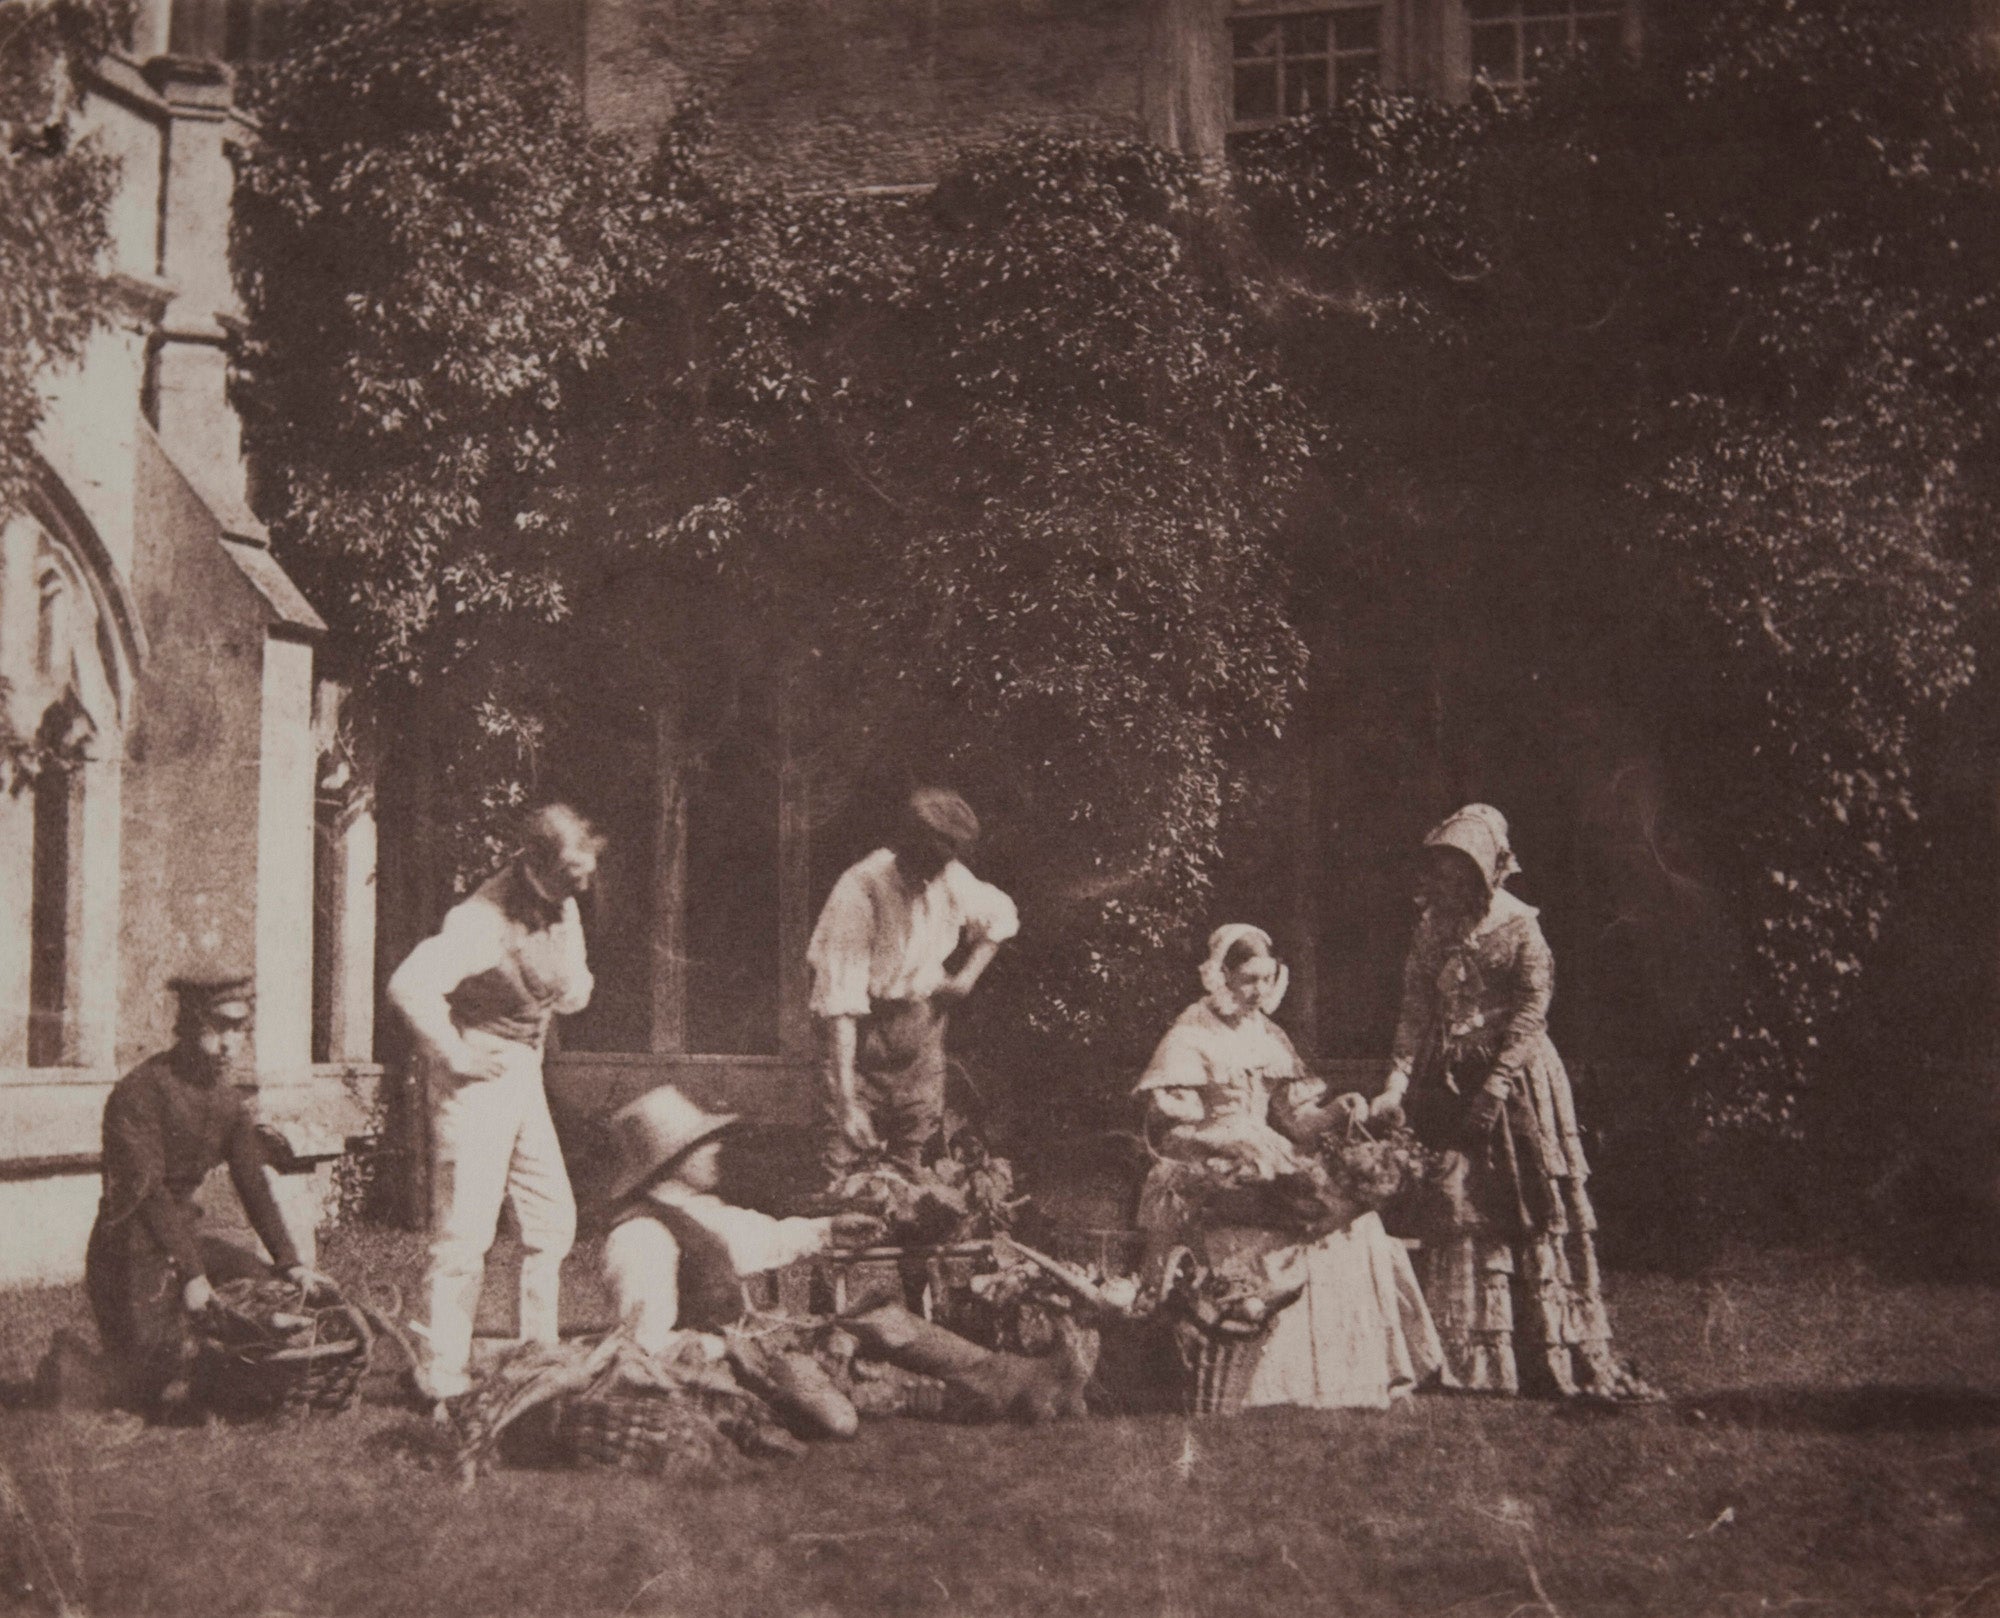 The Fruit Sellers by William Henry Fox Talbot, 1840s